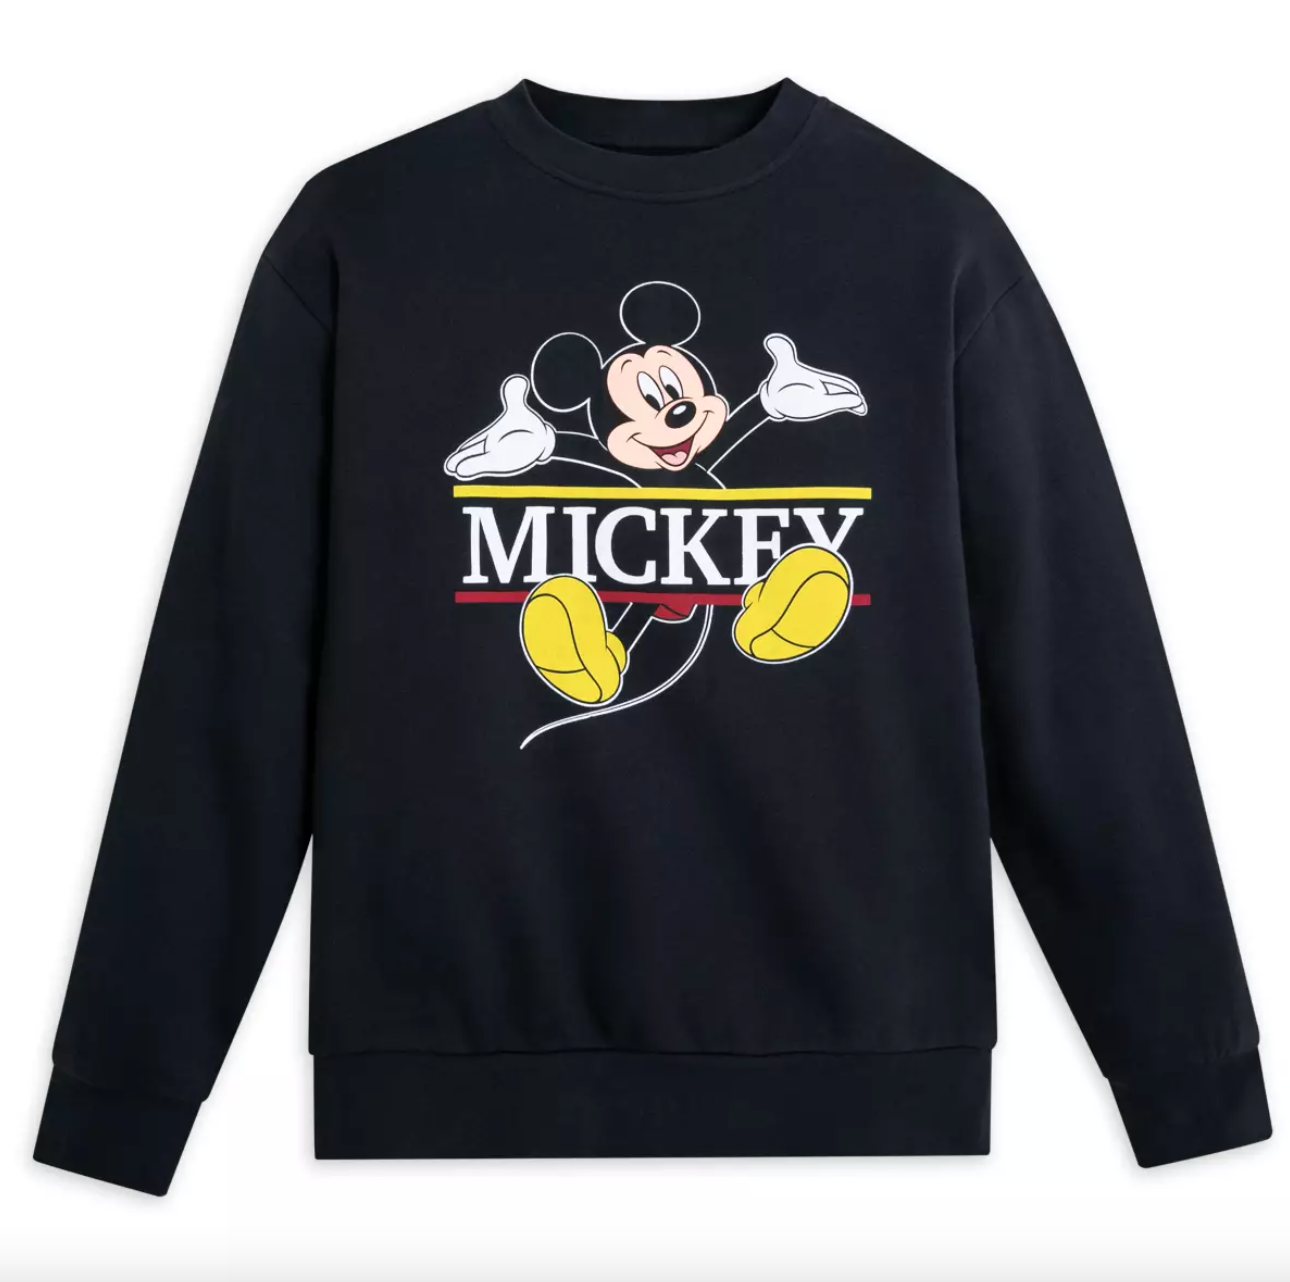 QUICK! Disney's NEW Sweatshirts Have Gone VIRAL Online (and They're ...